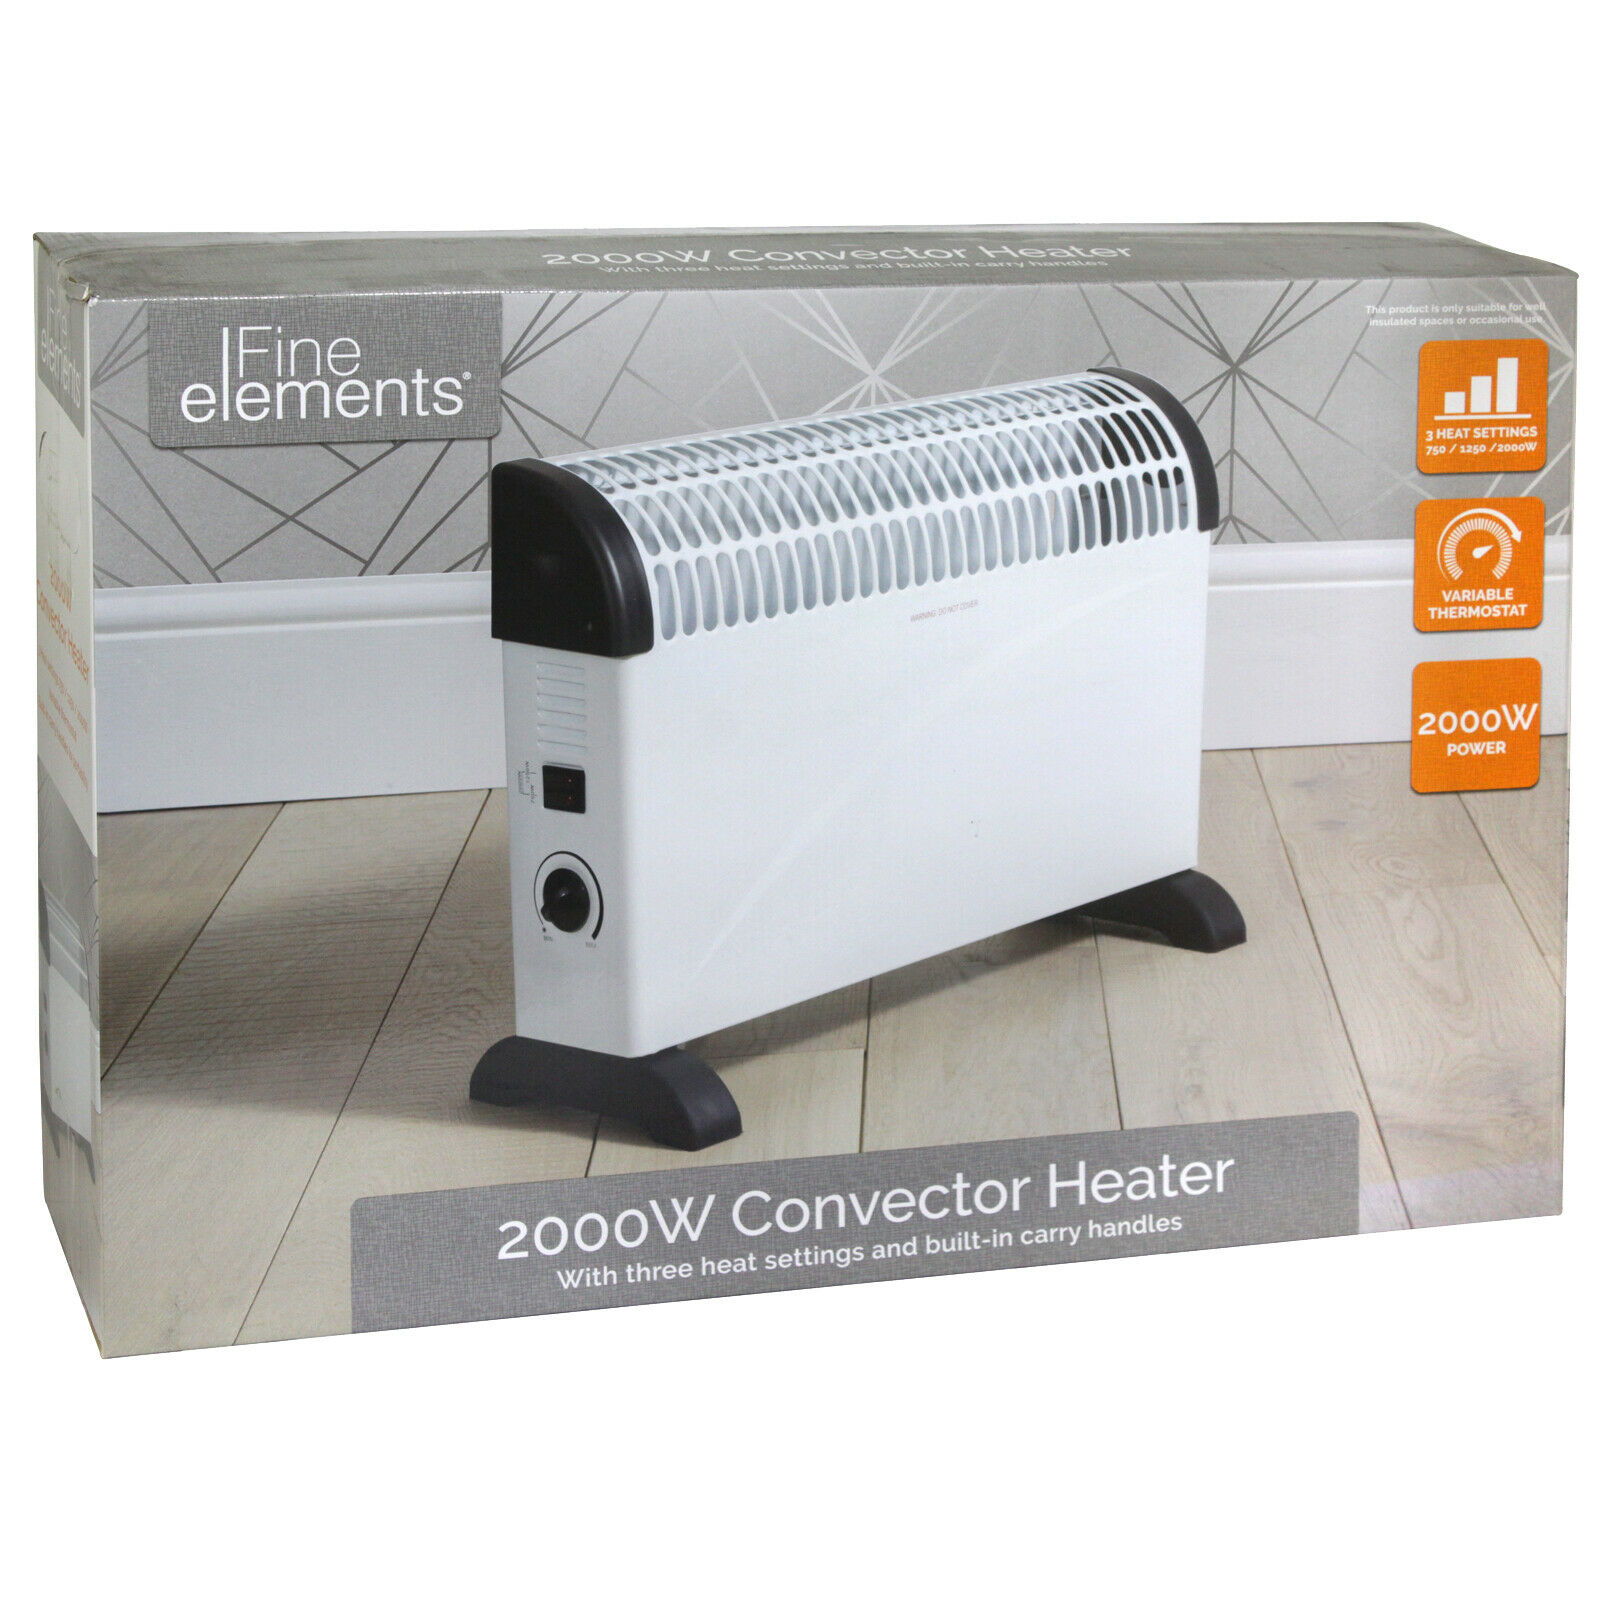 Two Power Settings Red Sentik 2000w Portable Electric Thermostat Convector Heater